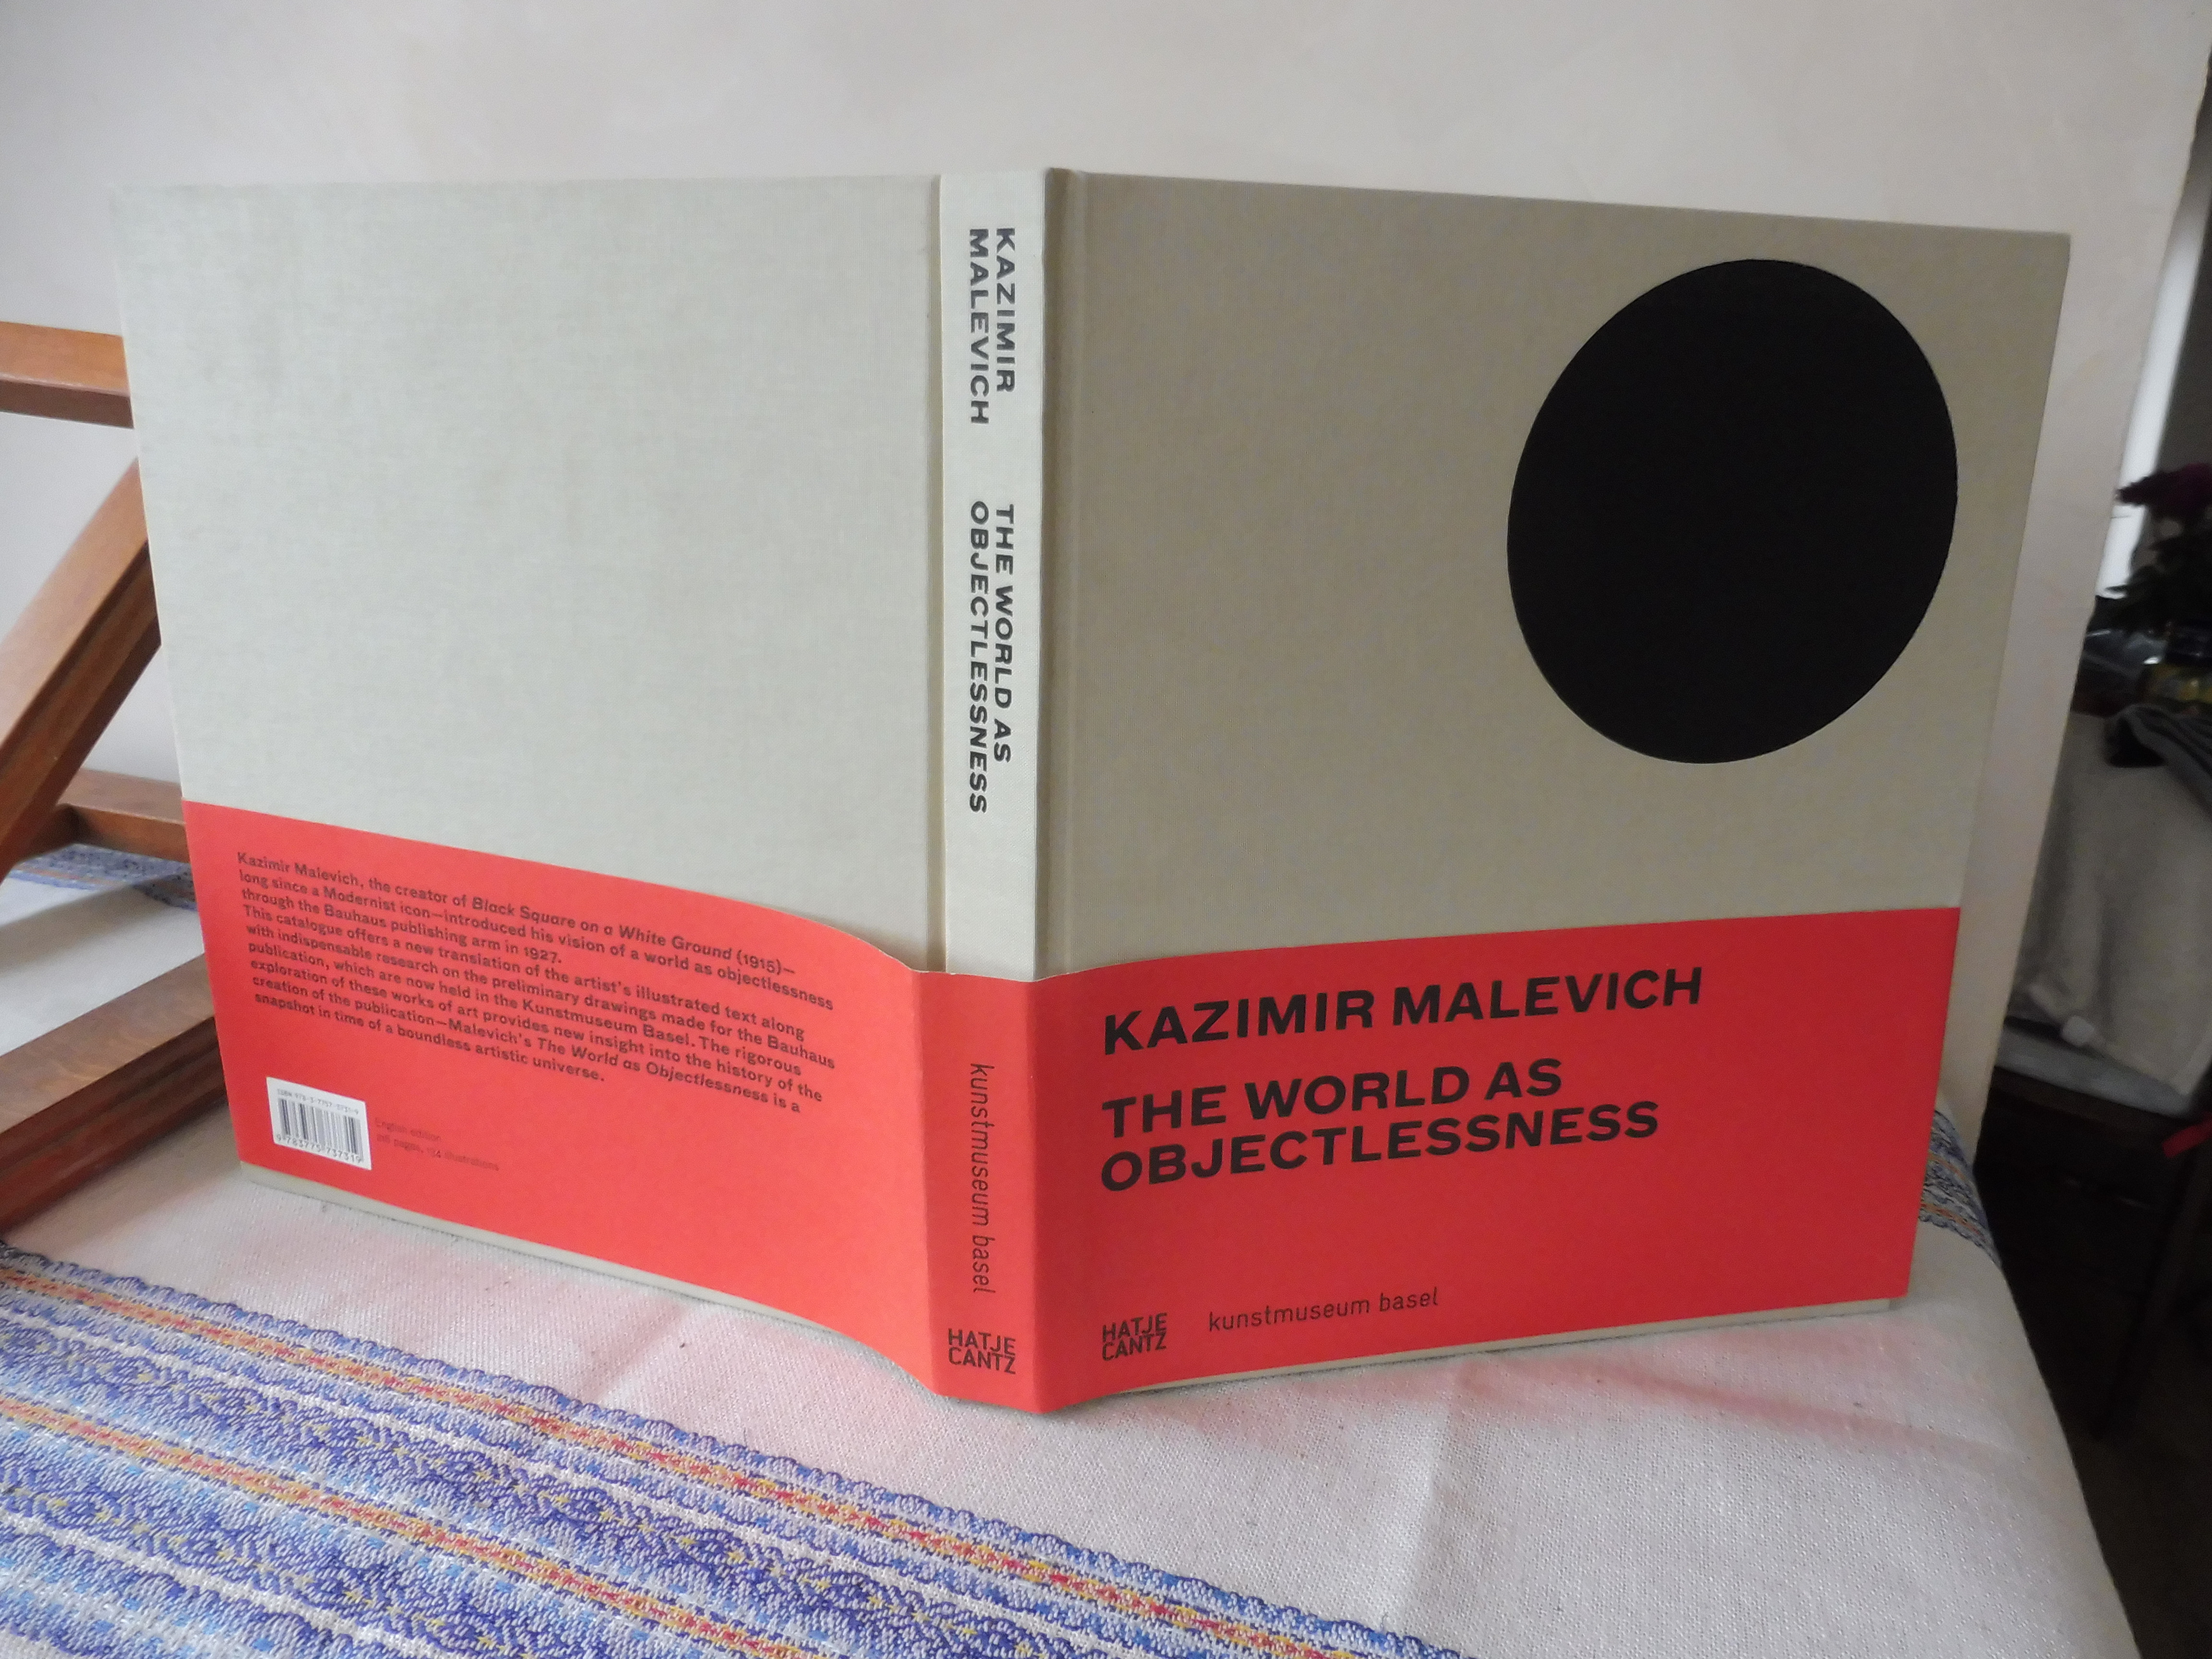 KAZIMIR MALEVICH THE WORLD AS OBJECTLESSNESS by Baier Simon and